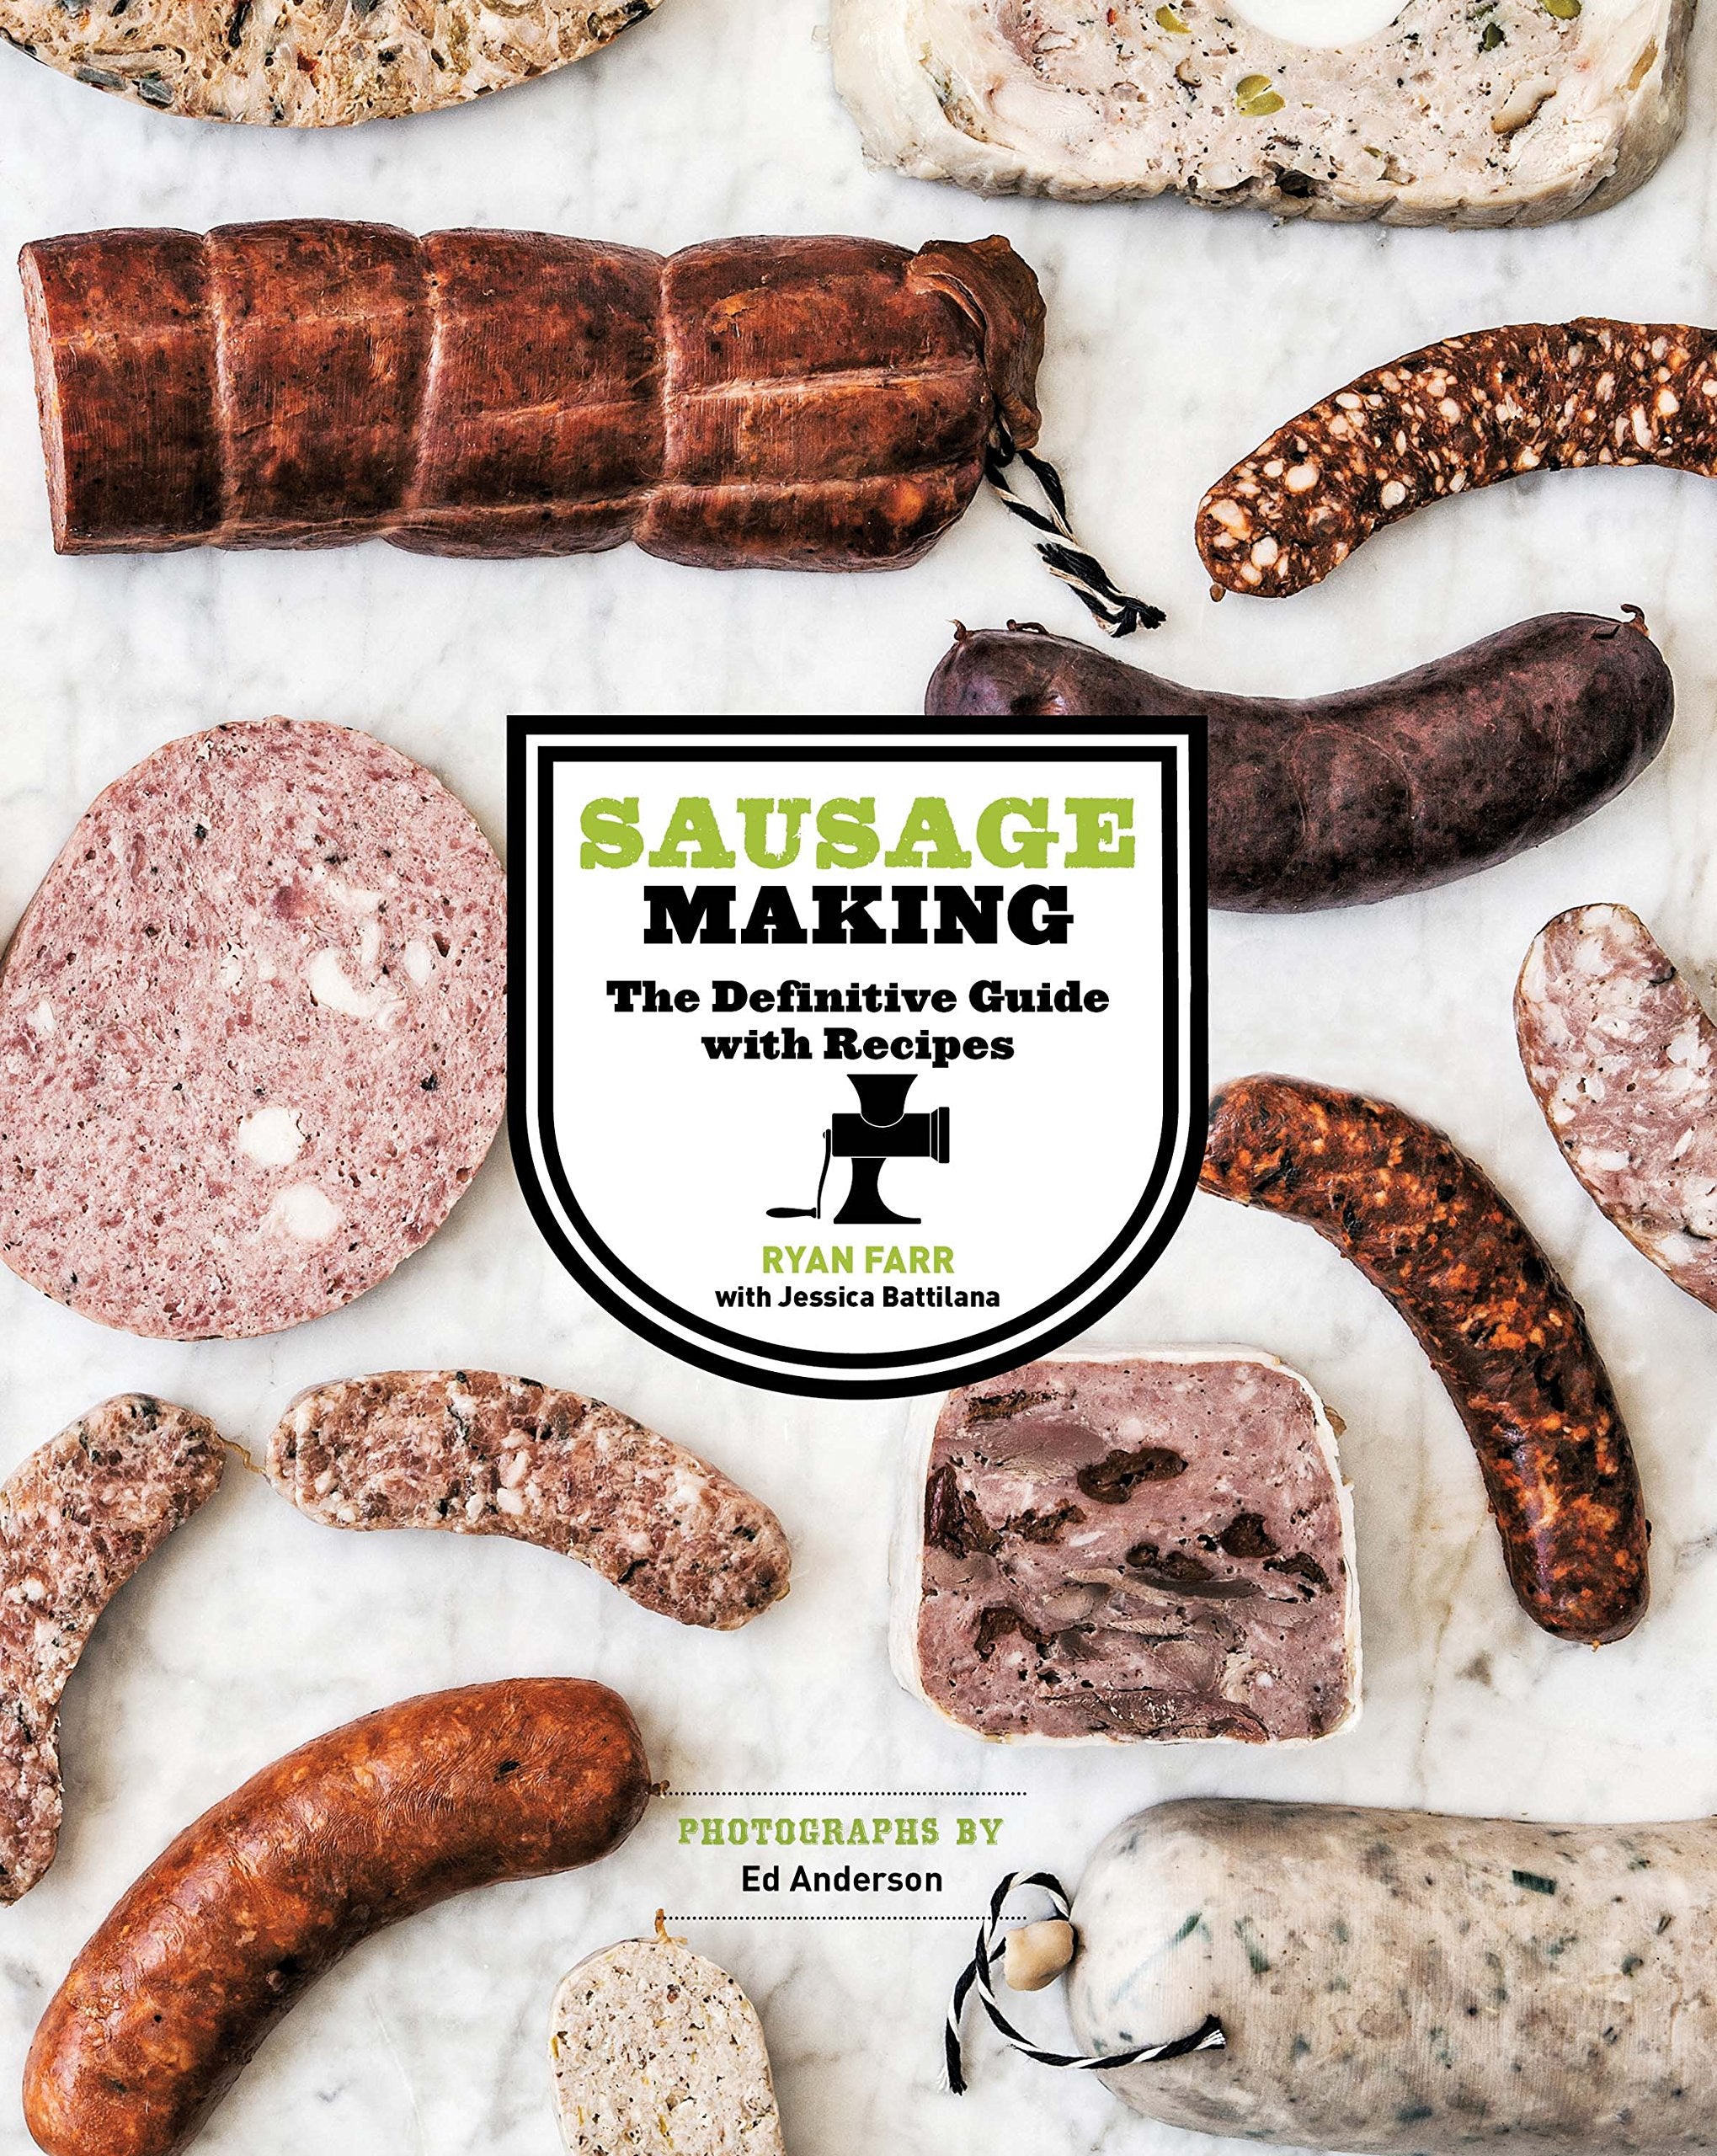 Sausage Making: The Definitive Guide with Recipes (Ryan Farr)